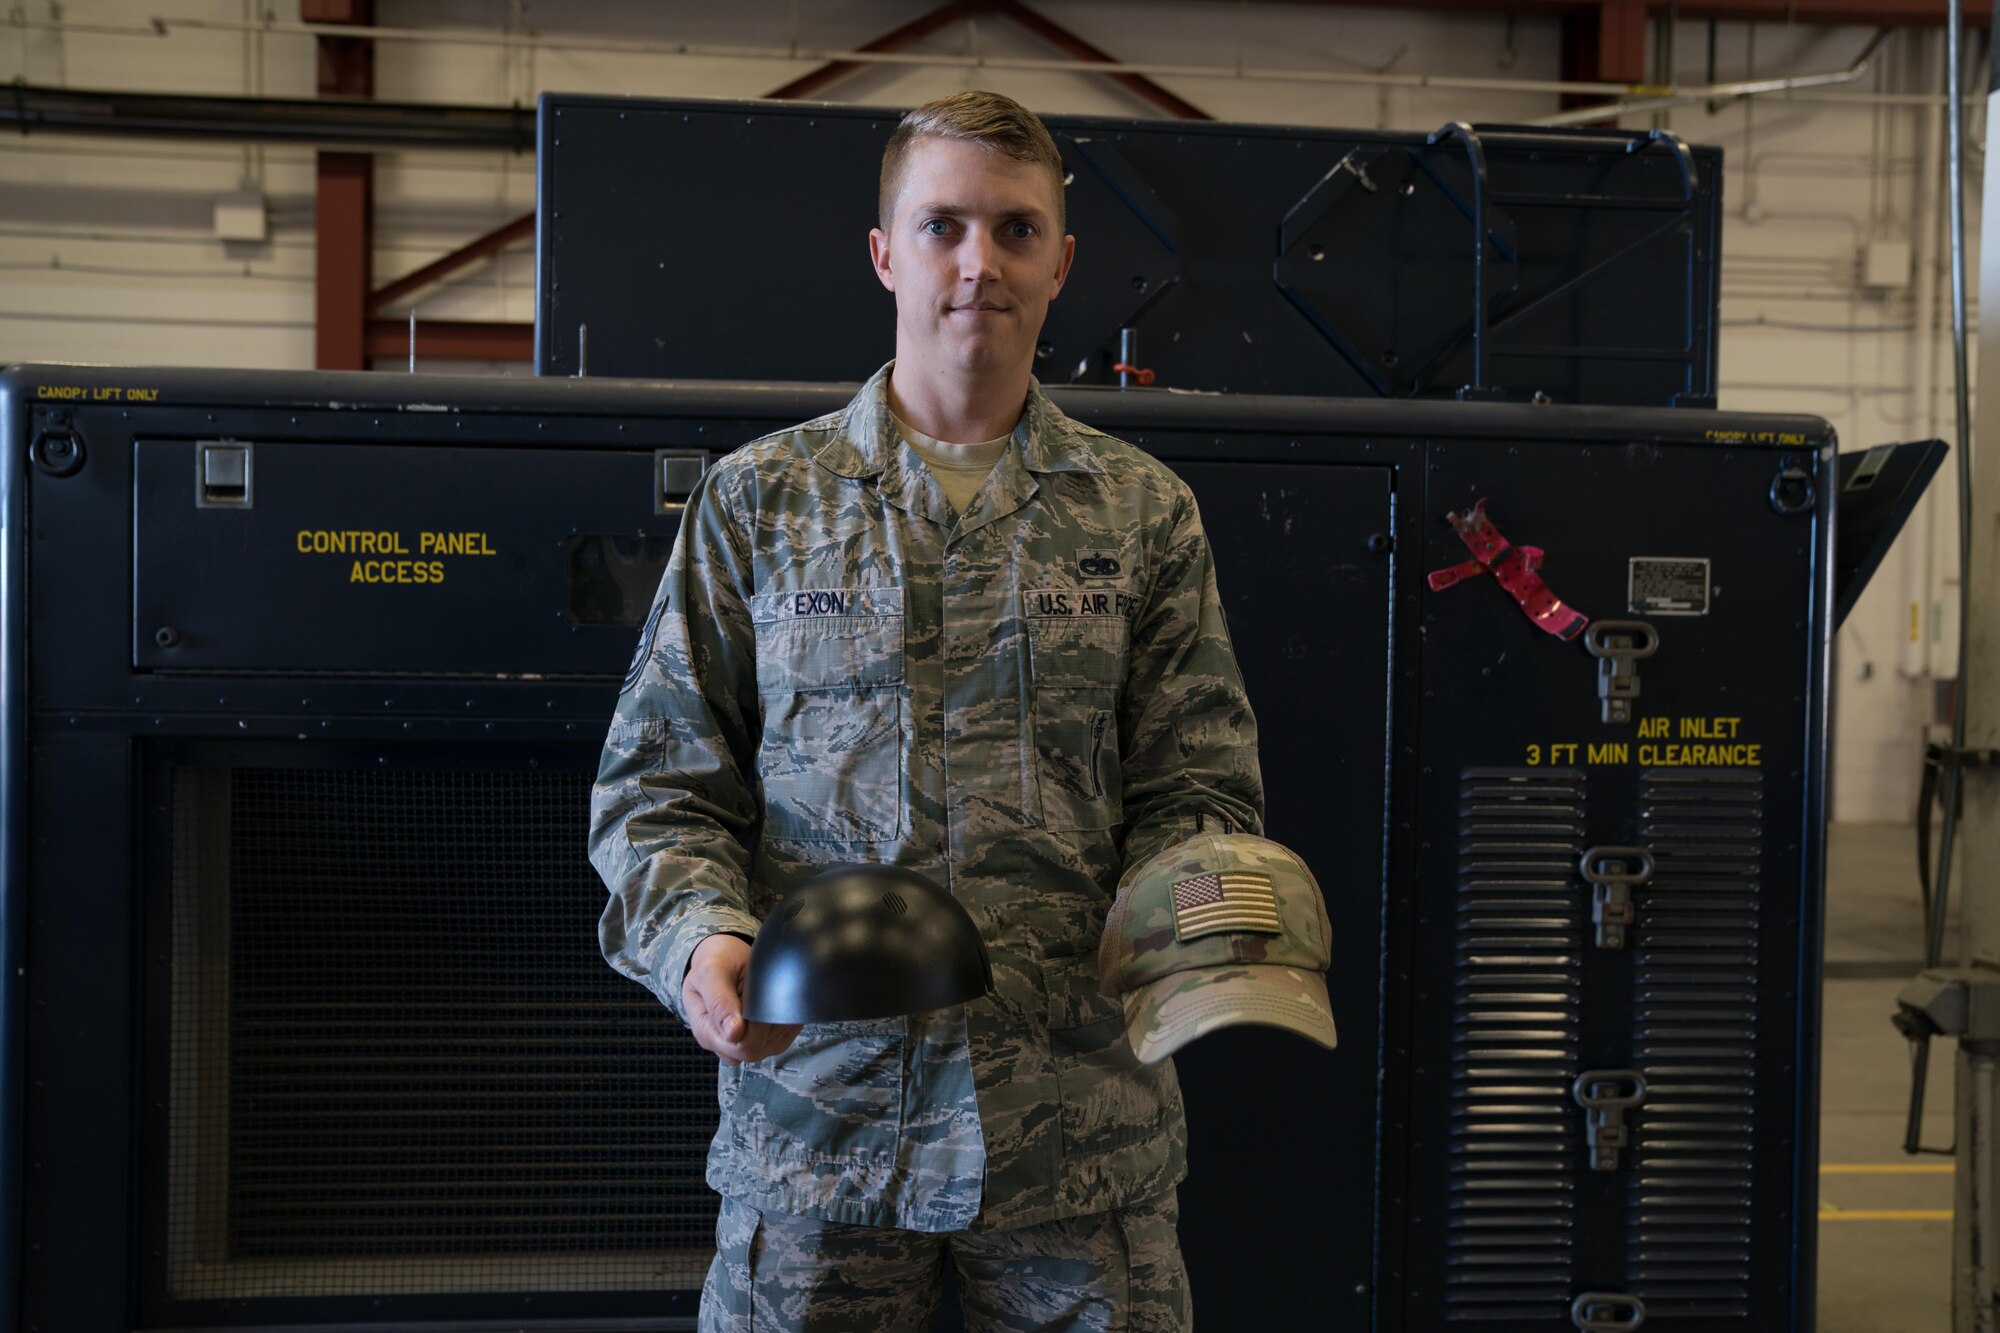 Tech. Sgt. Haisen Exon, 90th Missile Maintenance Squadron, Facilities Maintenance Section, support section NCOIC, shows the bump cap insert and how it inserts into a normal cap on F.E. Warren AFB, Wyoming, Nov. 18, 2019. He teams up with the 90th Missile Wing LaunchWerx agency to bring forward an idea to prevent future head injuries across the wing. (U.S. Air Force photo by Joseph Coslett)